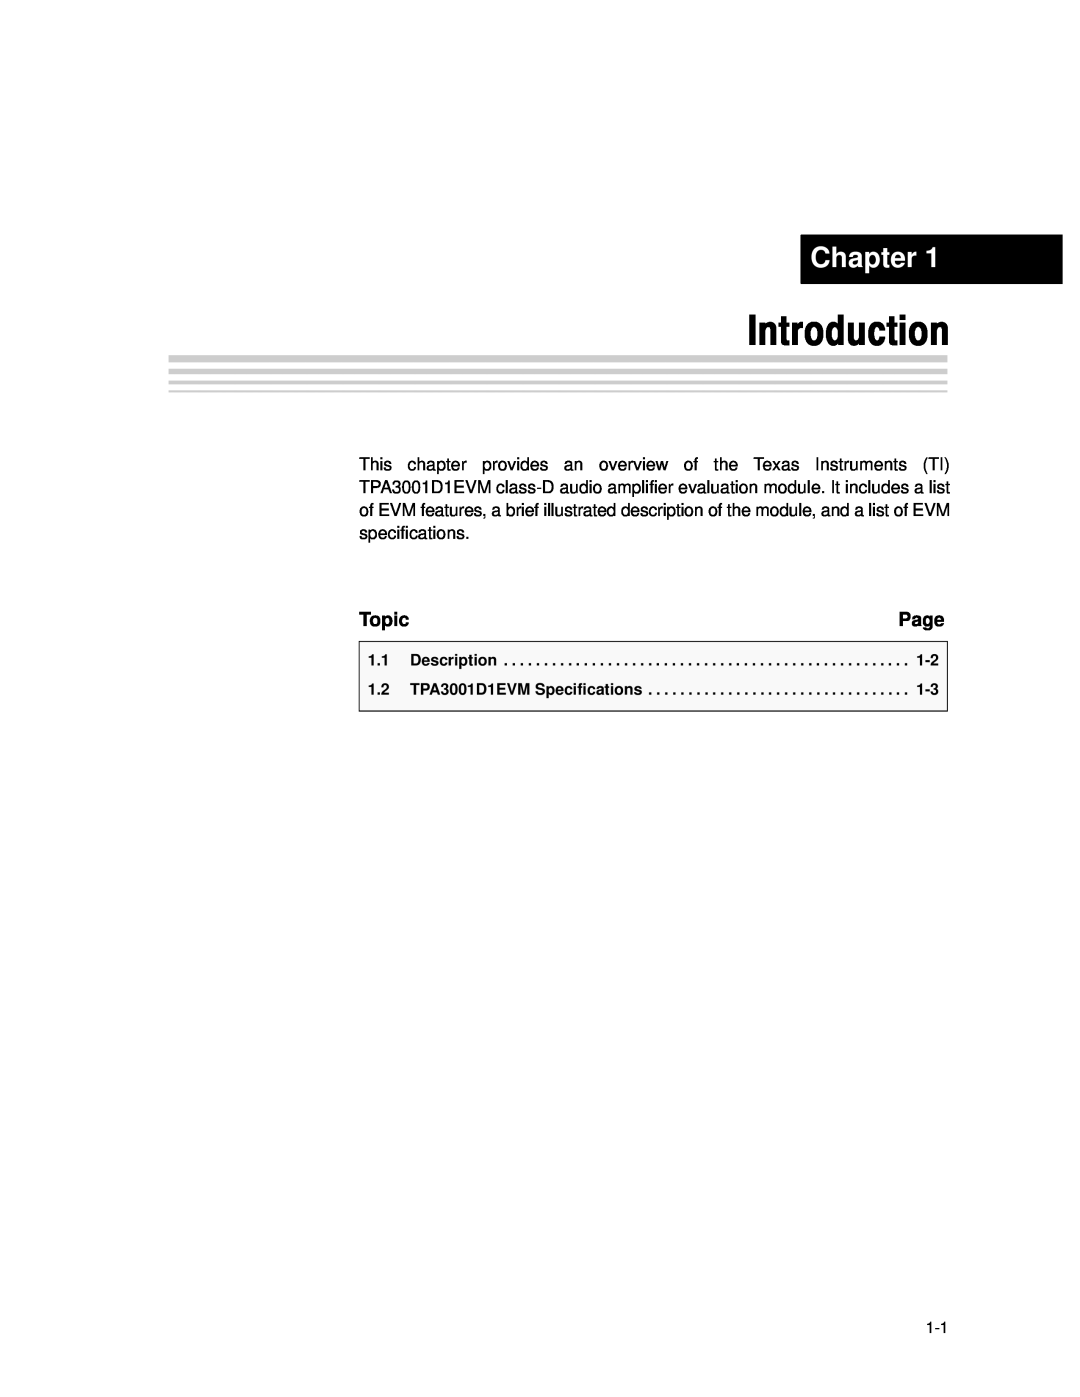 Texas Instruments TPA3001D1EVM manual Introduction, Chapter, Page, Topic 